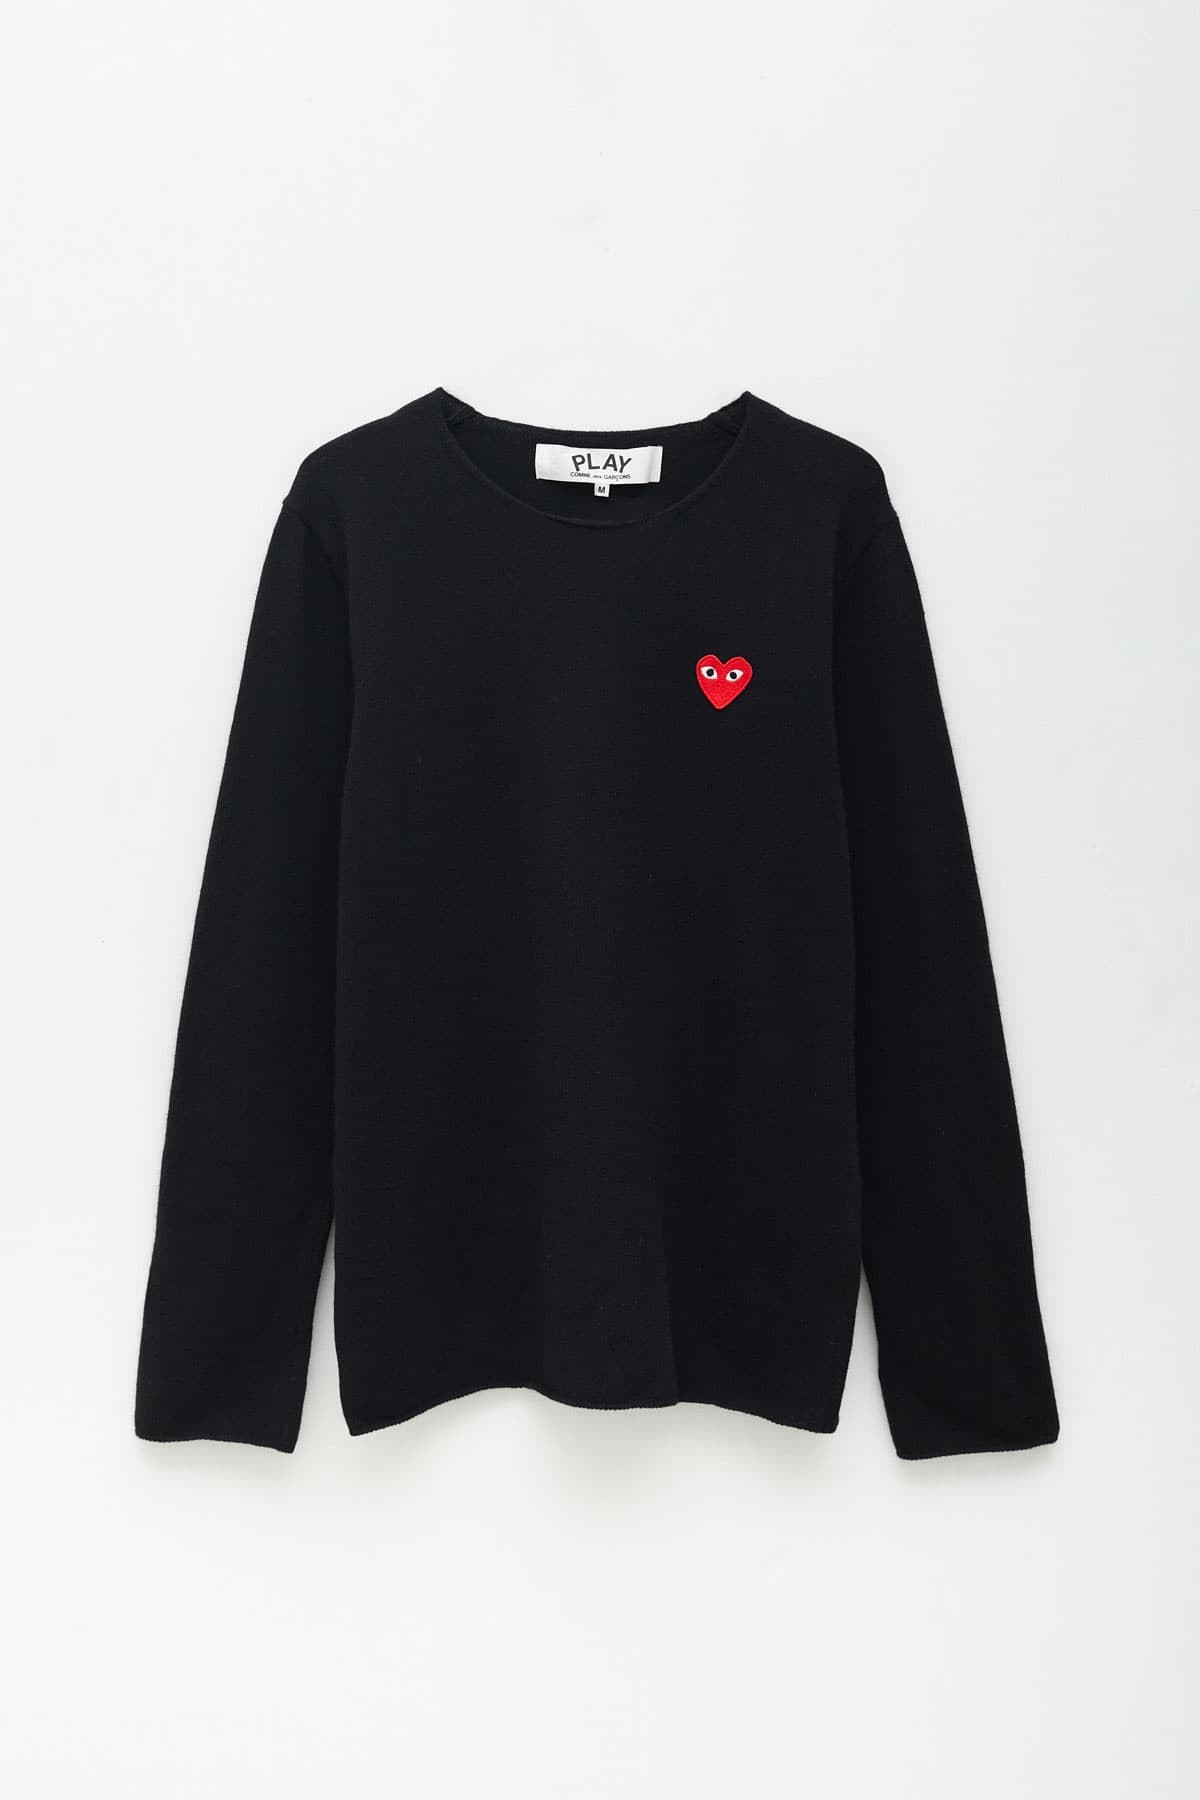 COMME DES GARCONS PLAY BLACK SWEATER IAMNUE